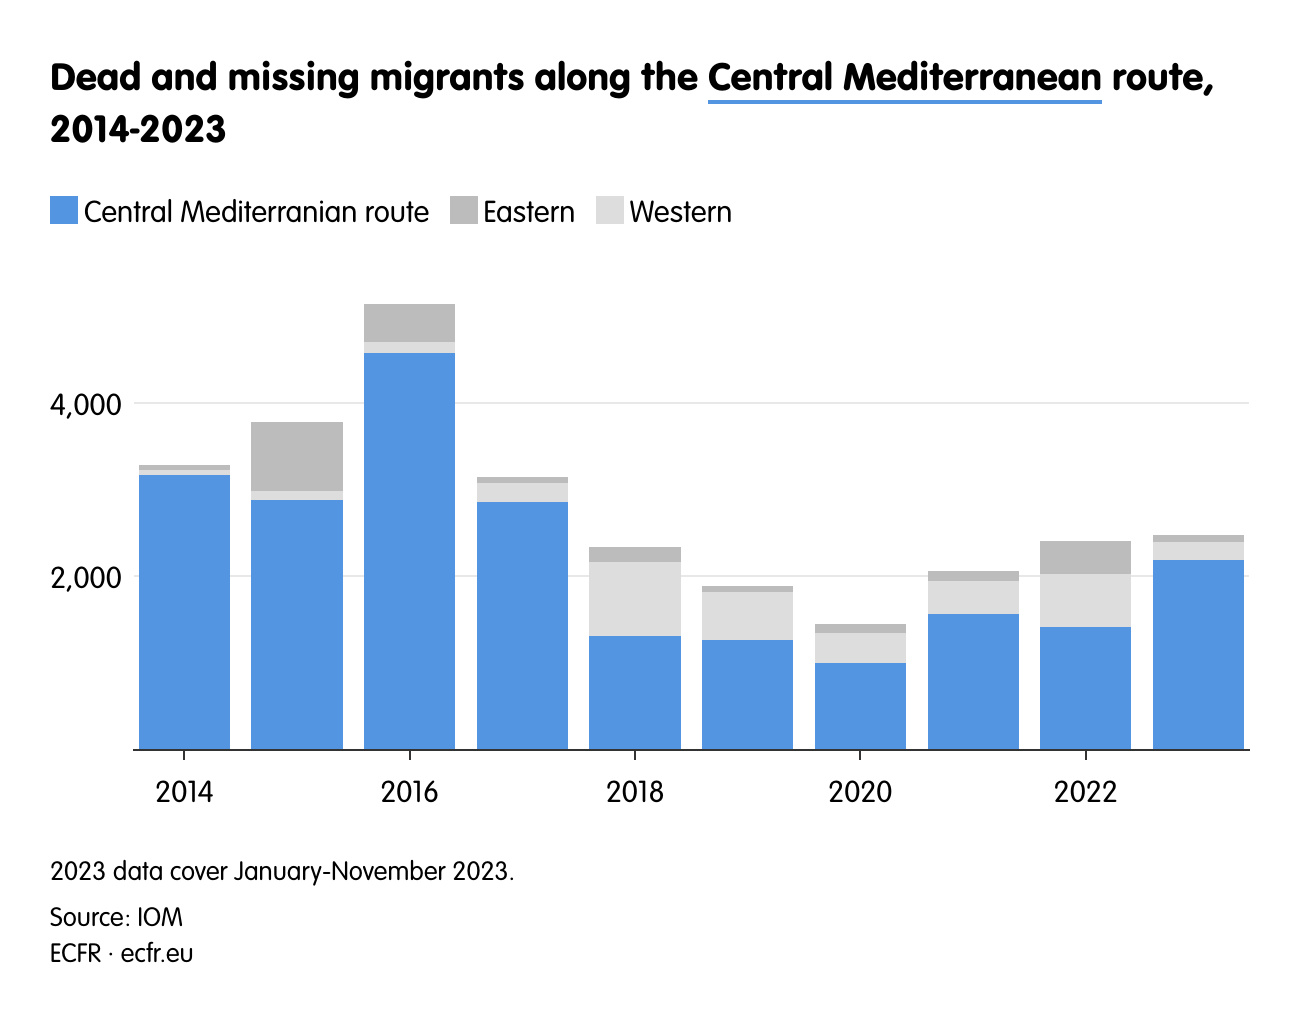 Dead and missing migrants along the Central Mediterranean route, 2014-2023